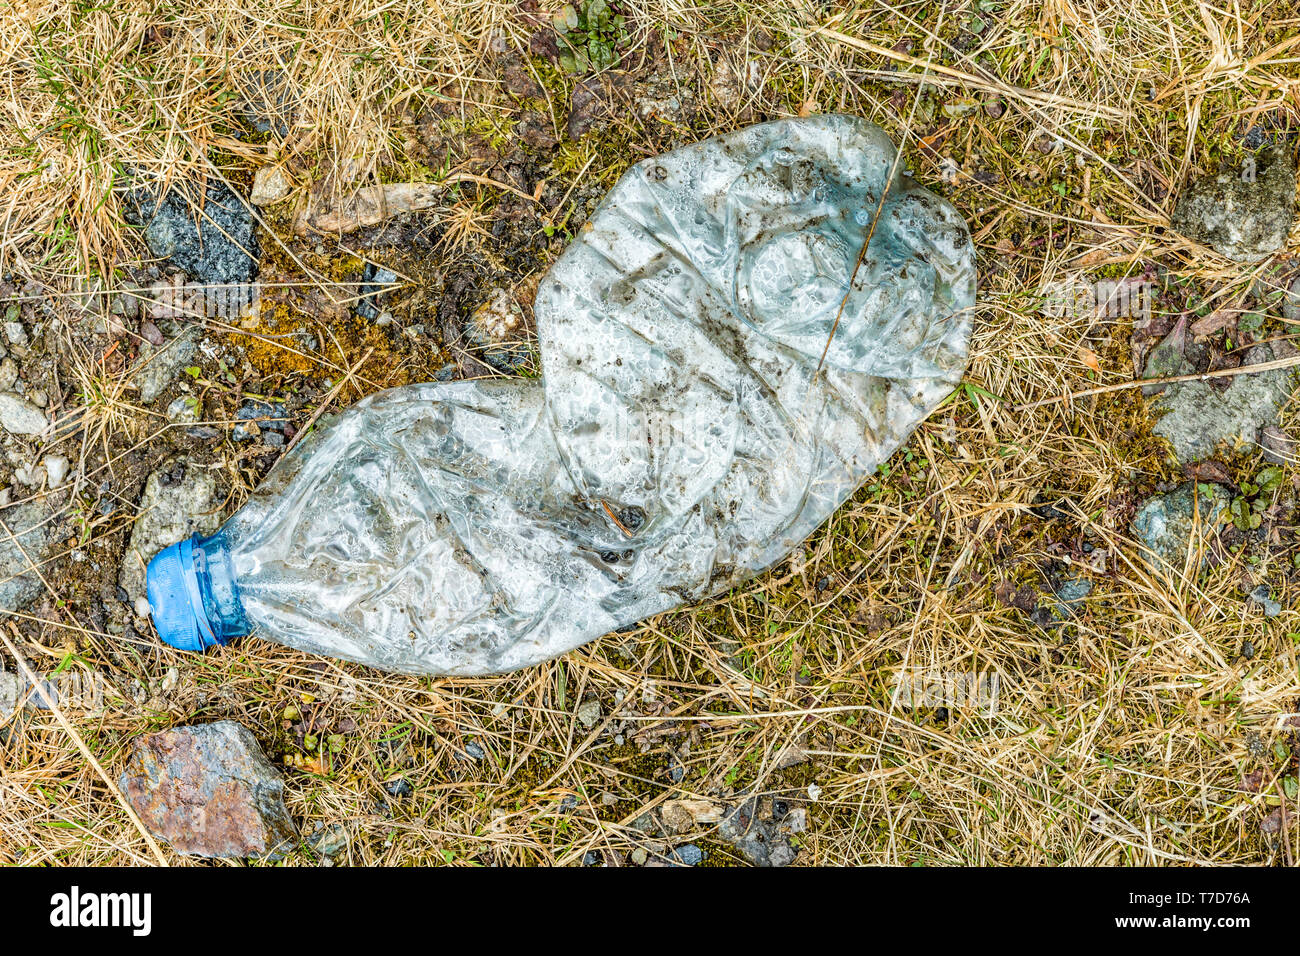 Plastic water bottle left on forest floor in a remote location Stock Photo